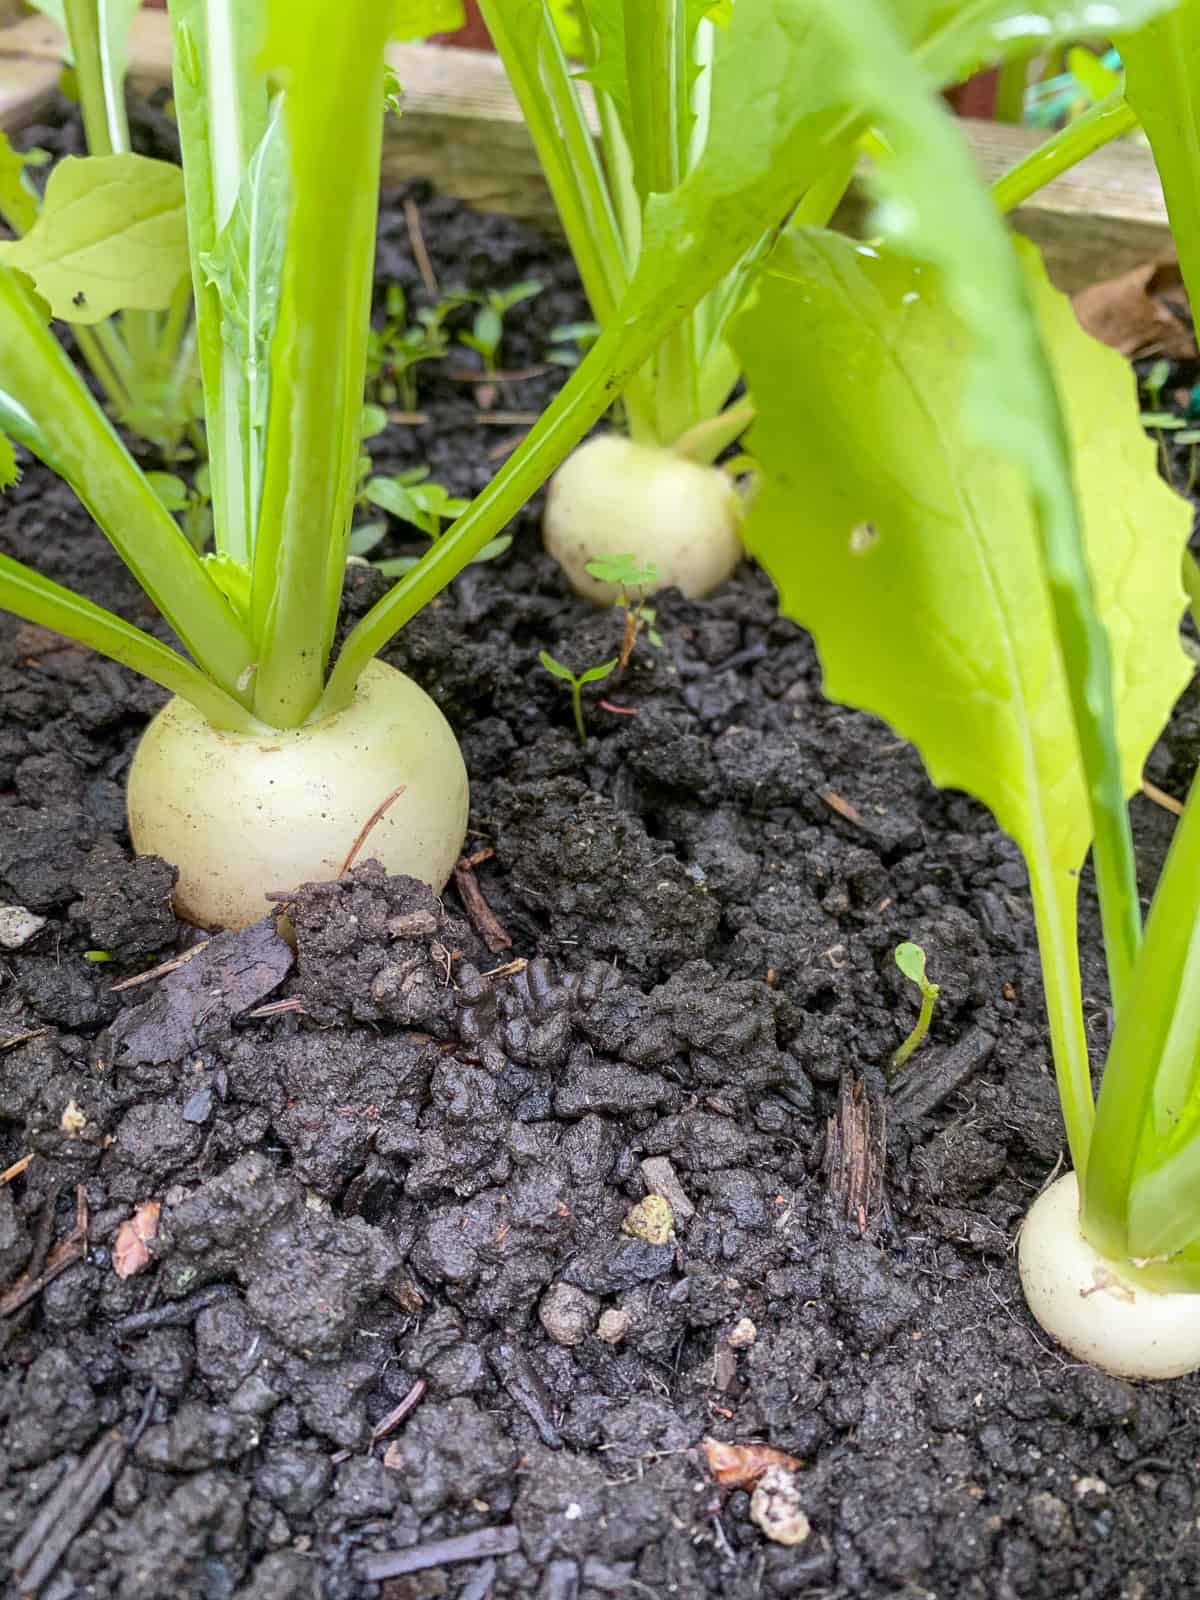 A close up image of turnips growing in a raised bed Square Foot Garden.